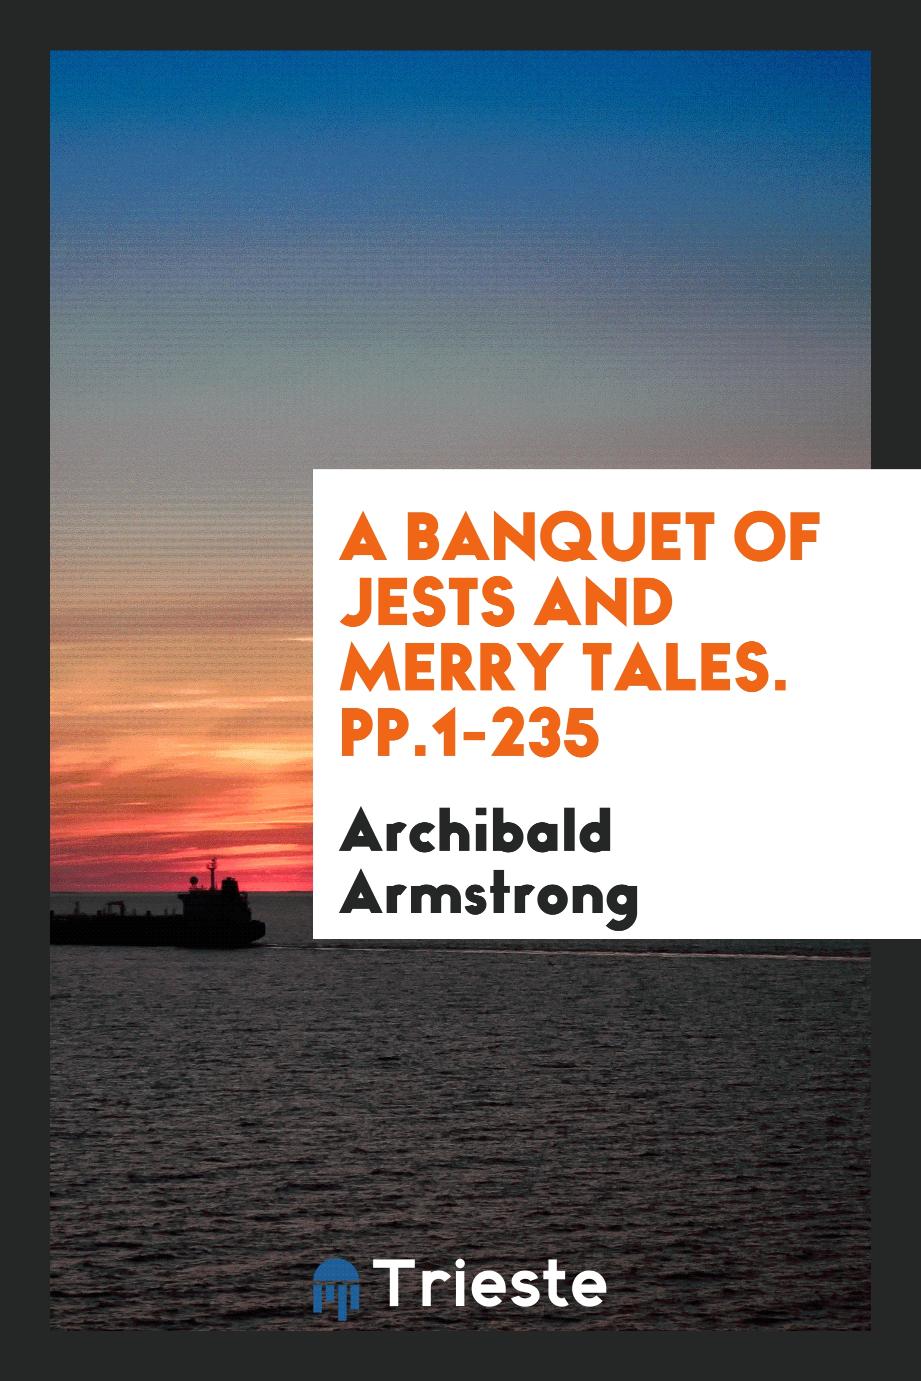 A Banquet of Jests and Merry Tales. pp.1-235